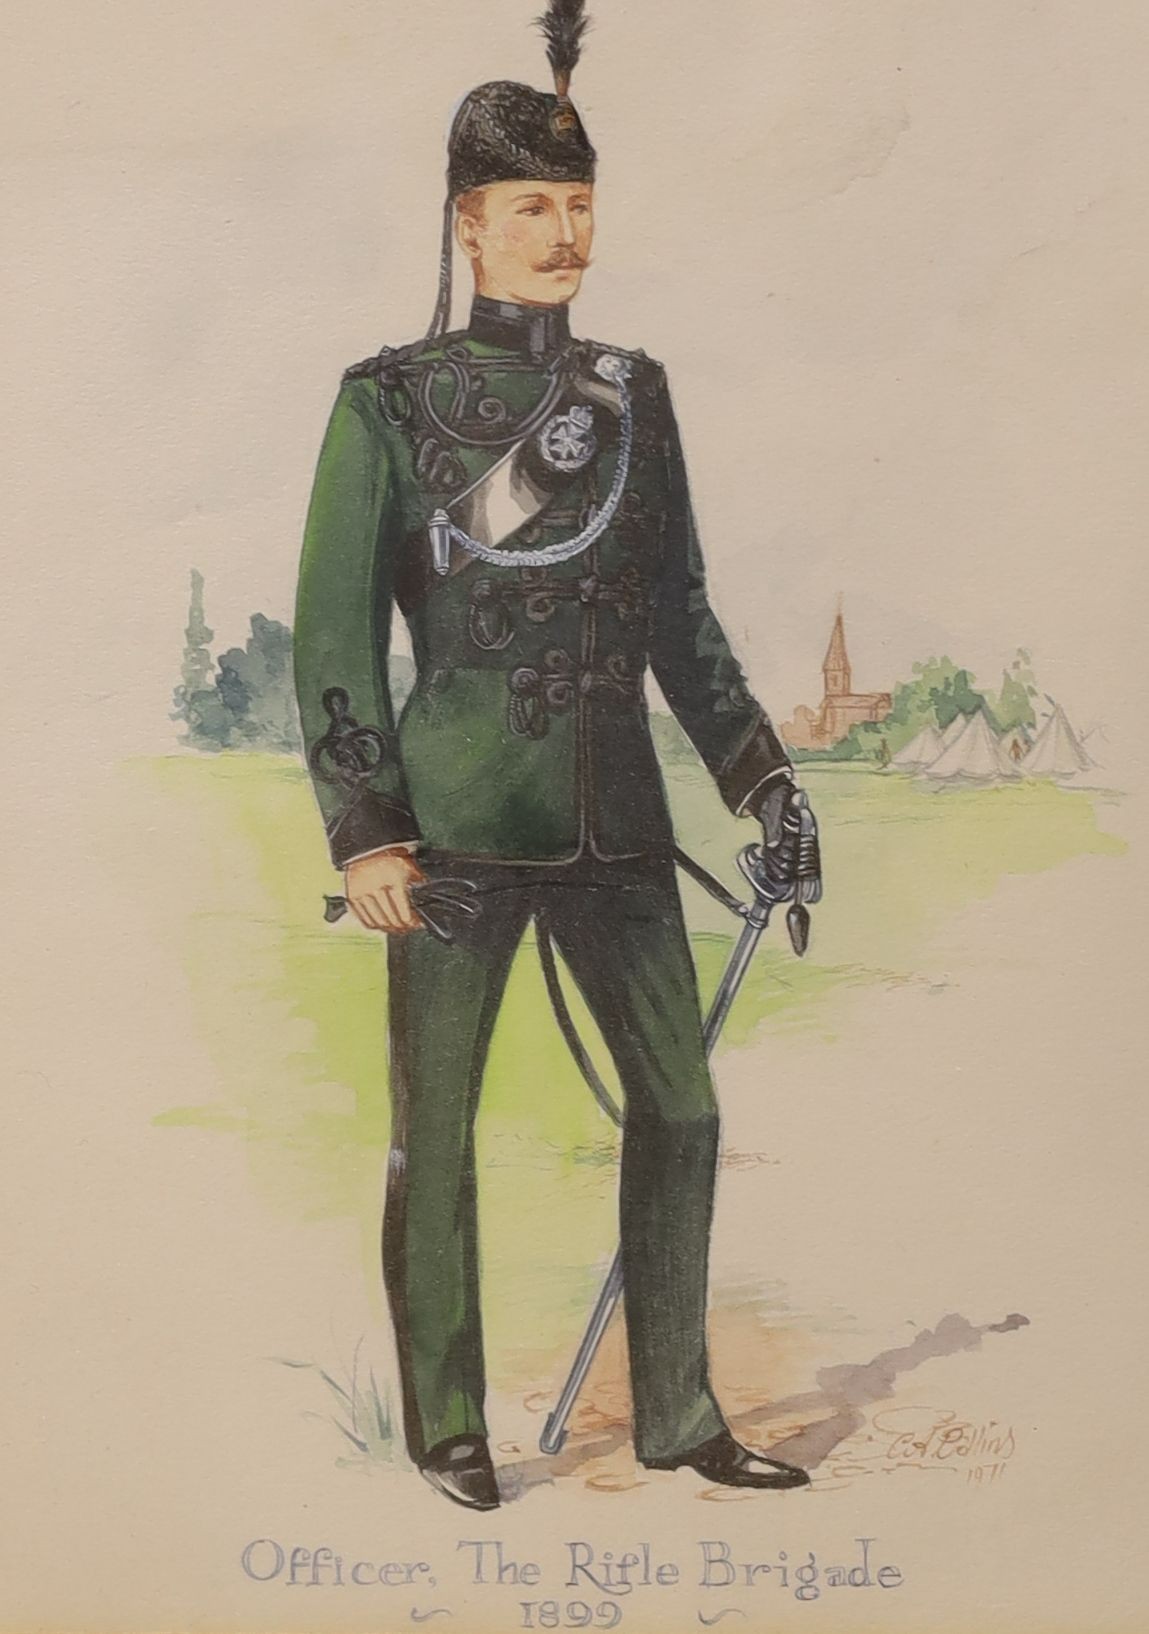 C.A. Collins, watercolour, Officer of the Rifle Brigade 1899, signed and dated 1971, 21 x 16cm and earlier watercolour caricature, The Gunners by Sniper, 34 x 26cm